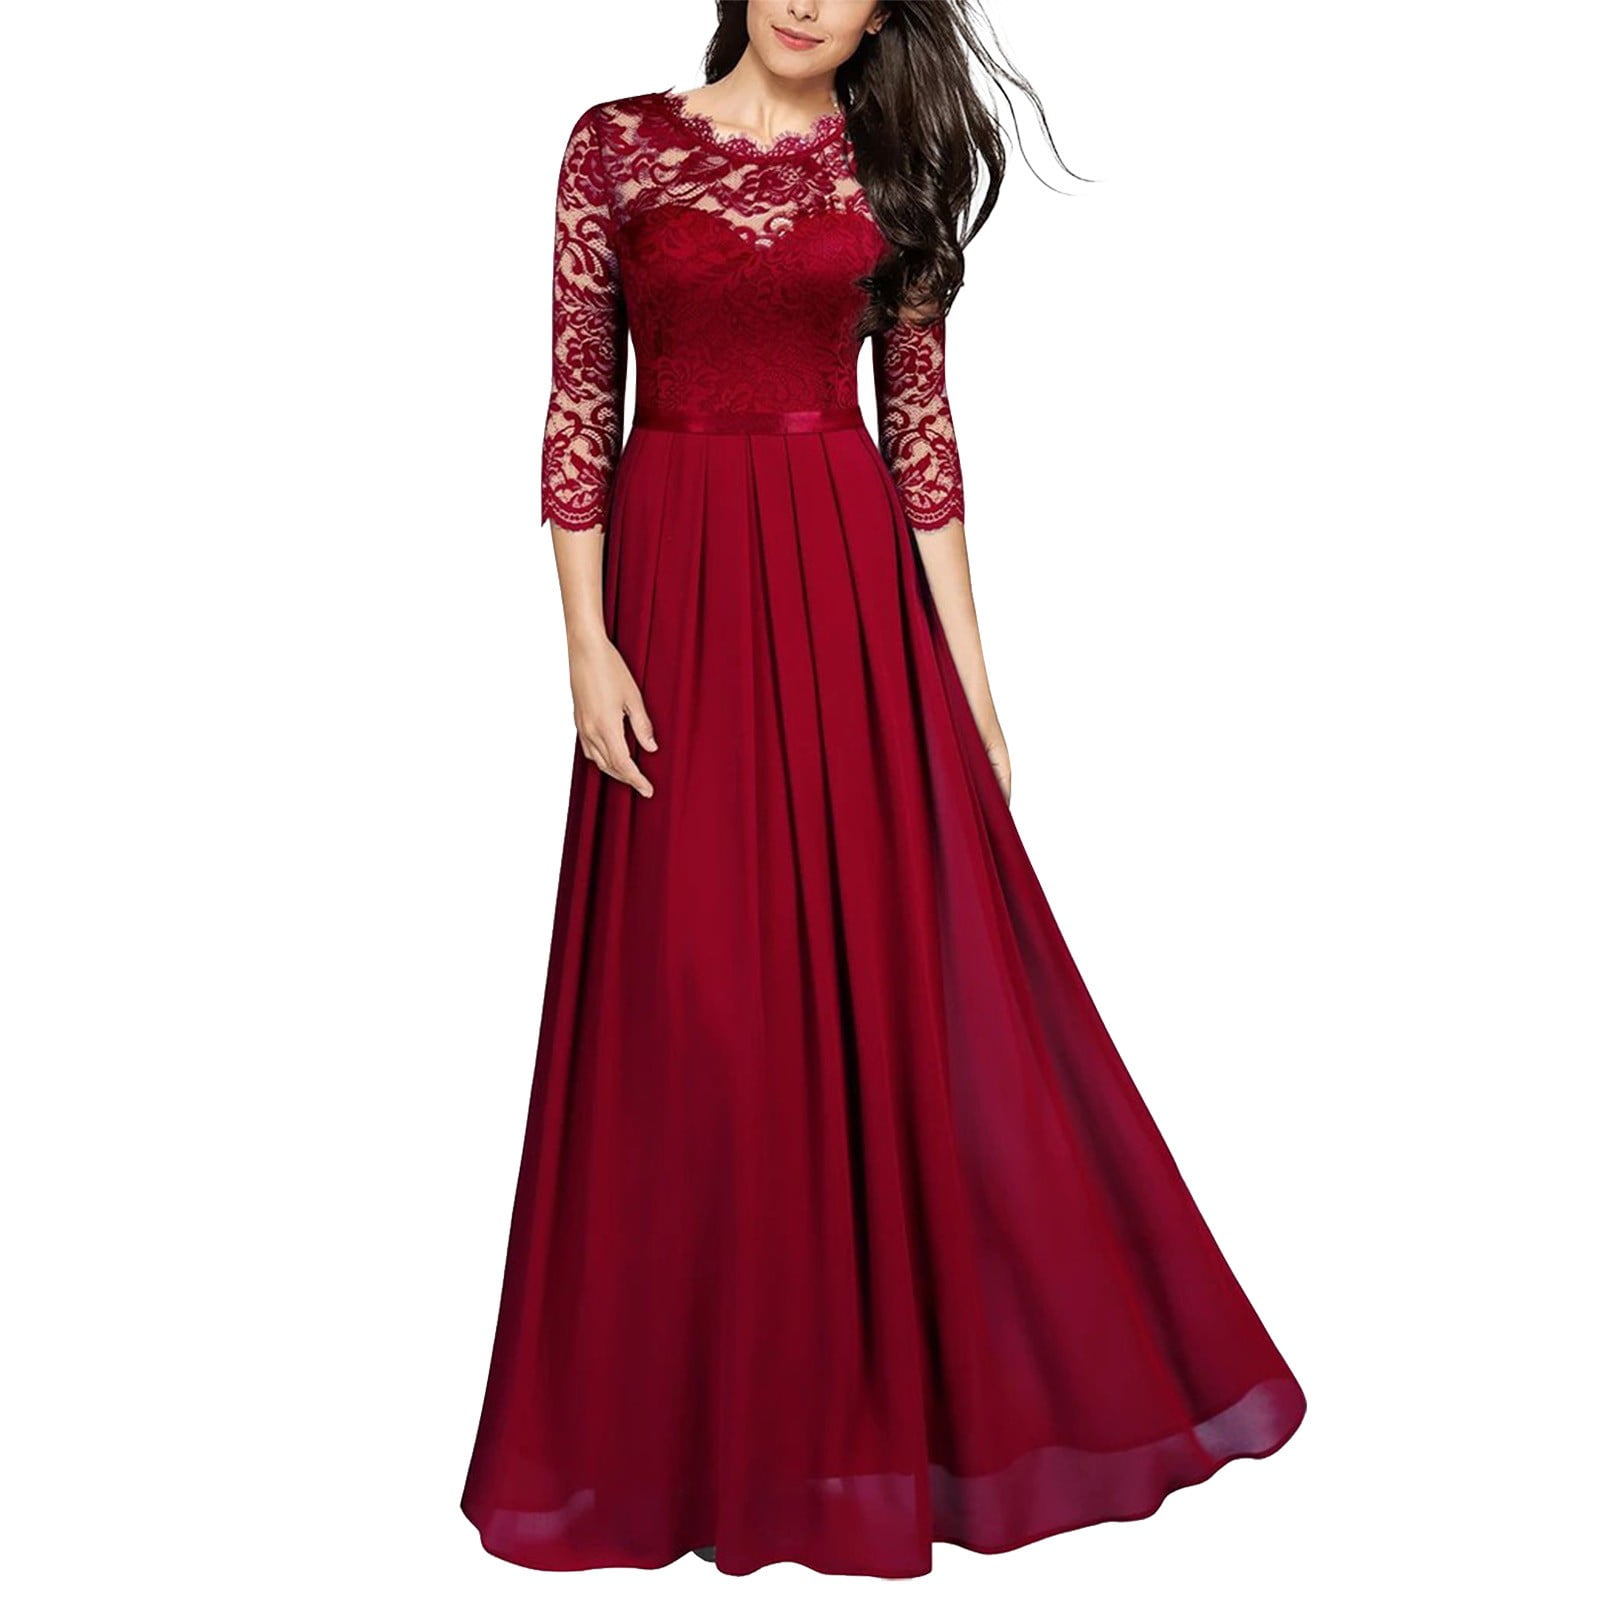 Sayhi Summer Dress for Women Evening Party Wedding Guest Formal Bridesmaid  Lace Prom Gown Elegant Dresses Red S 